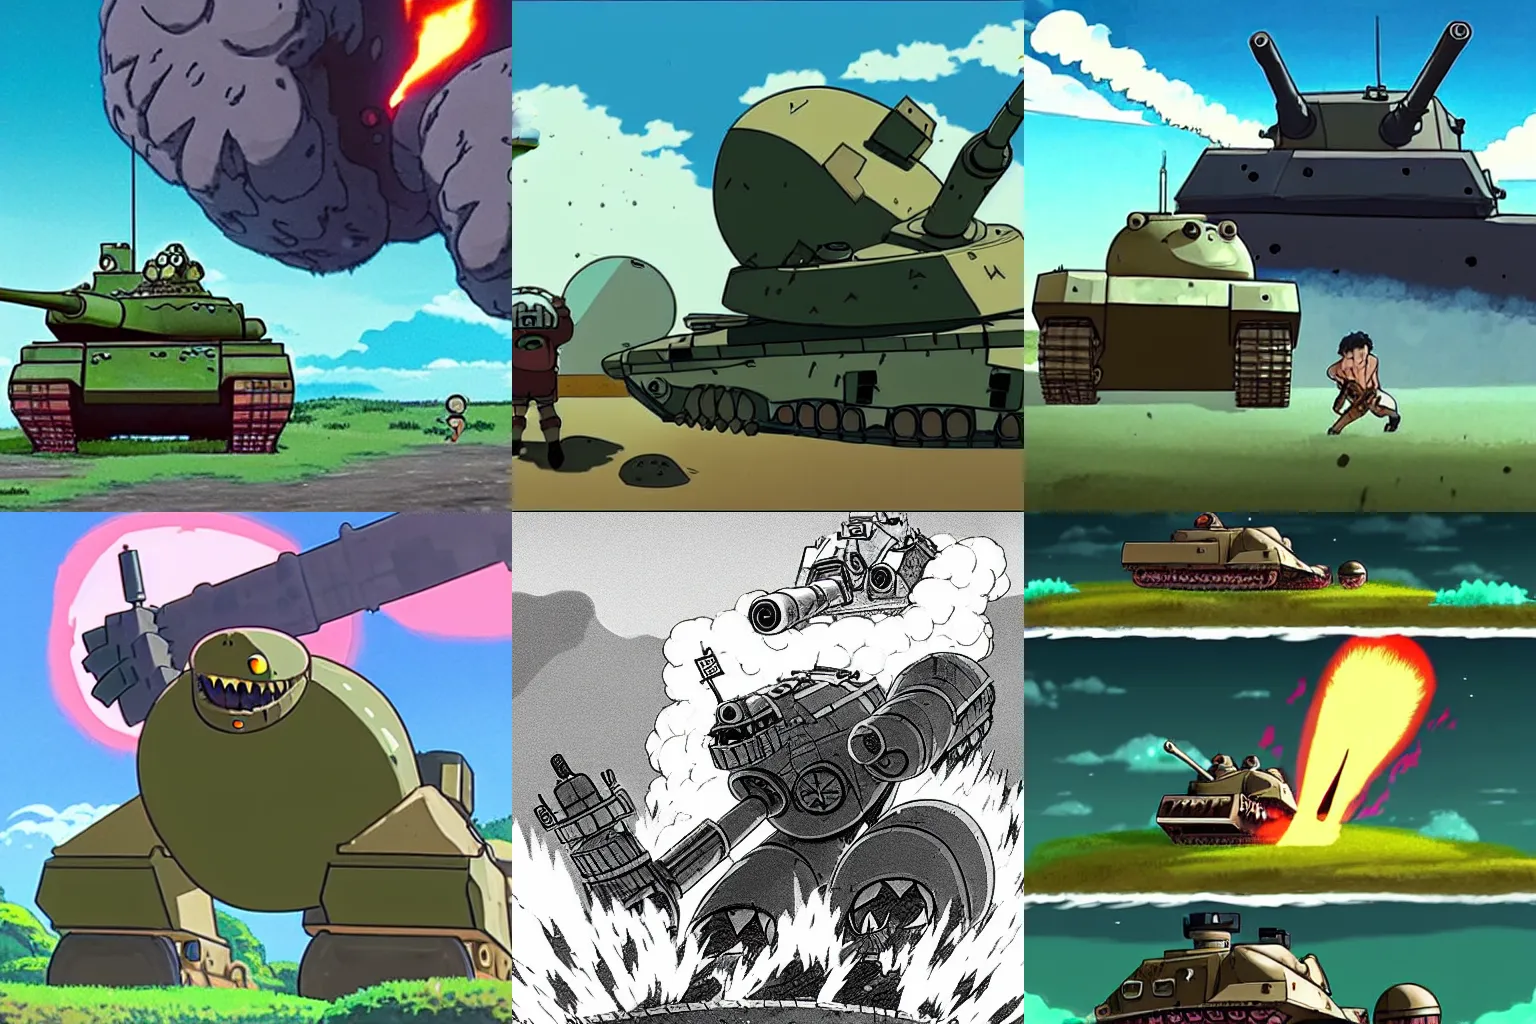 Prompt: An epic battle between a tank and a giant monster. The tank barrel has been ripped off the tank. A shell is exploding in the monster's torso. The crew is abandoning the tank right before it explodes. In the style of Studio Ghibli.